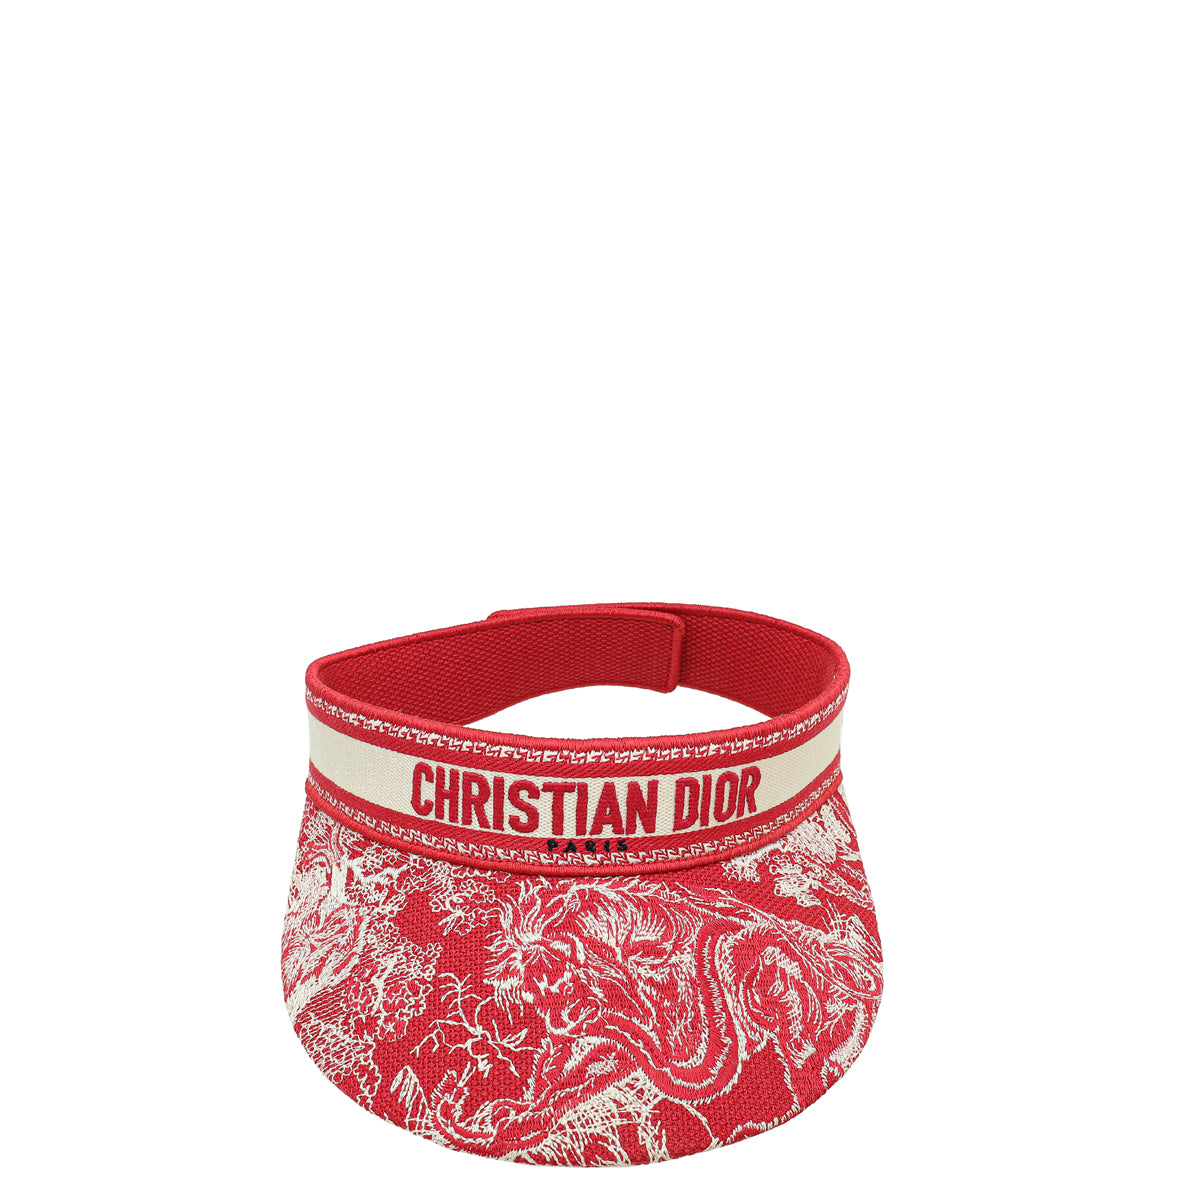 Christian Dior Red Toile De Jouy Embroidered Visor Hat